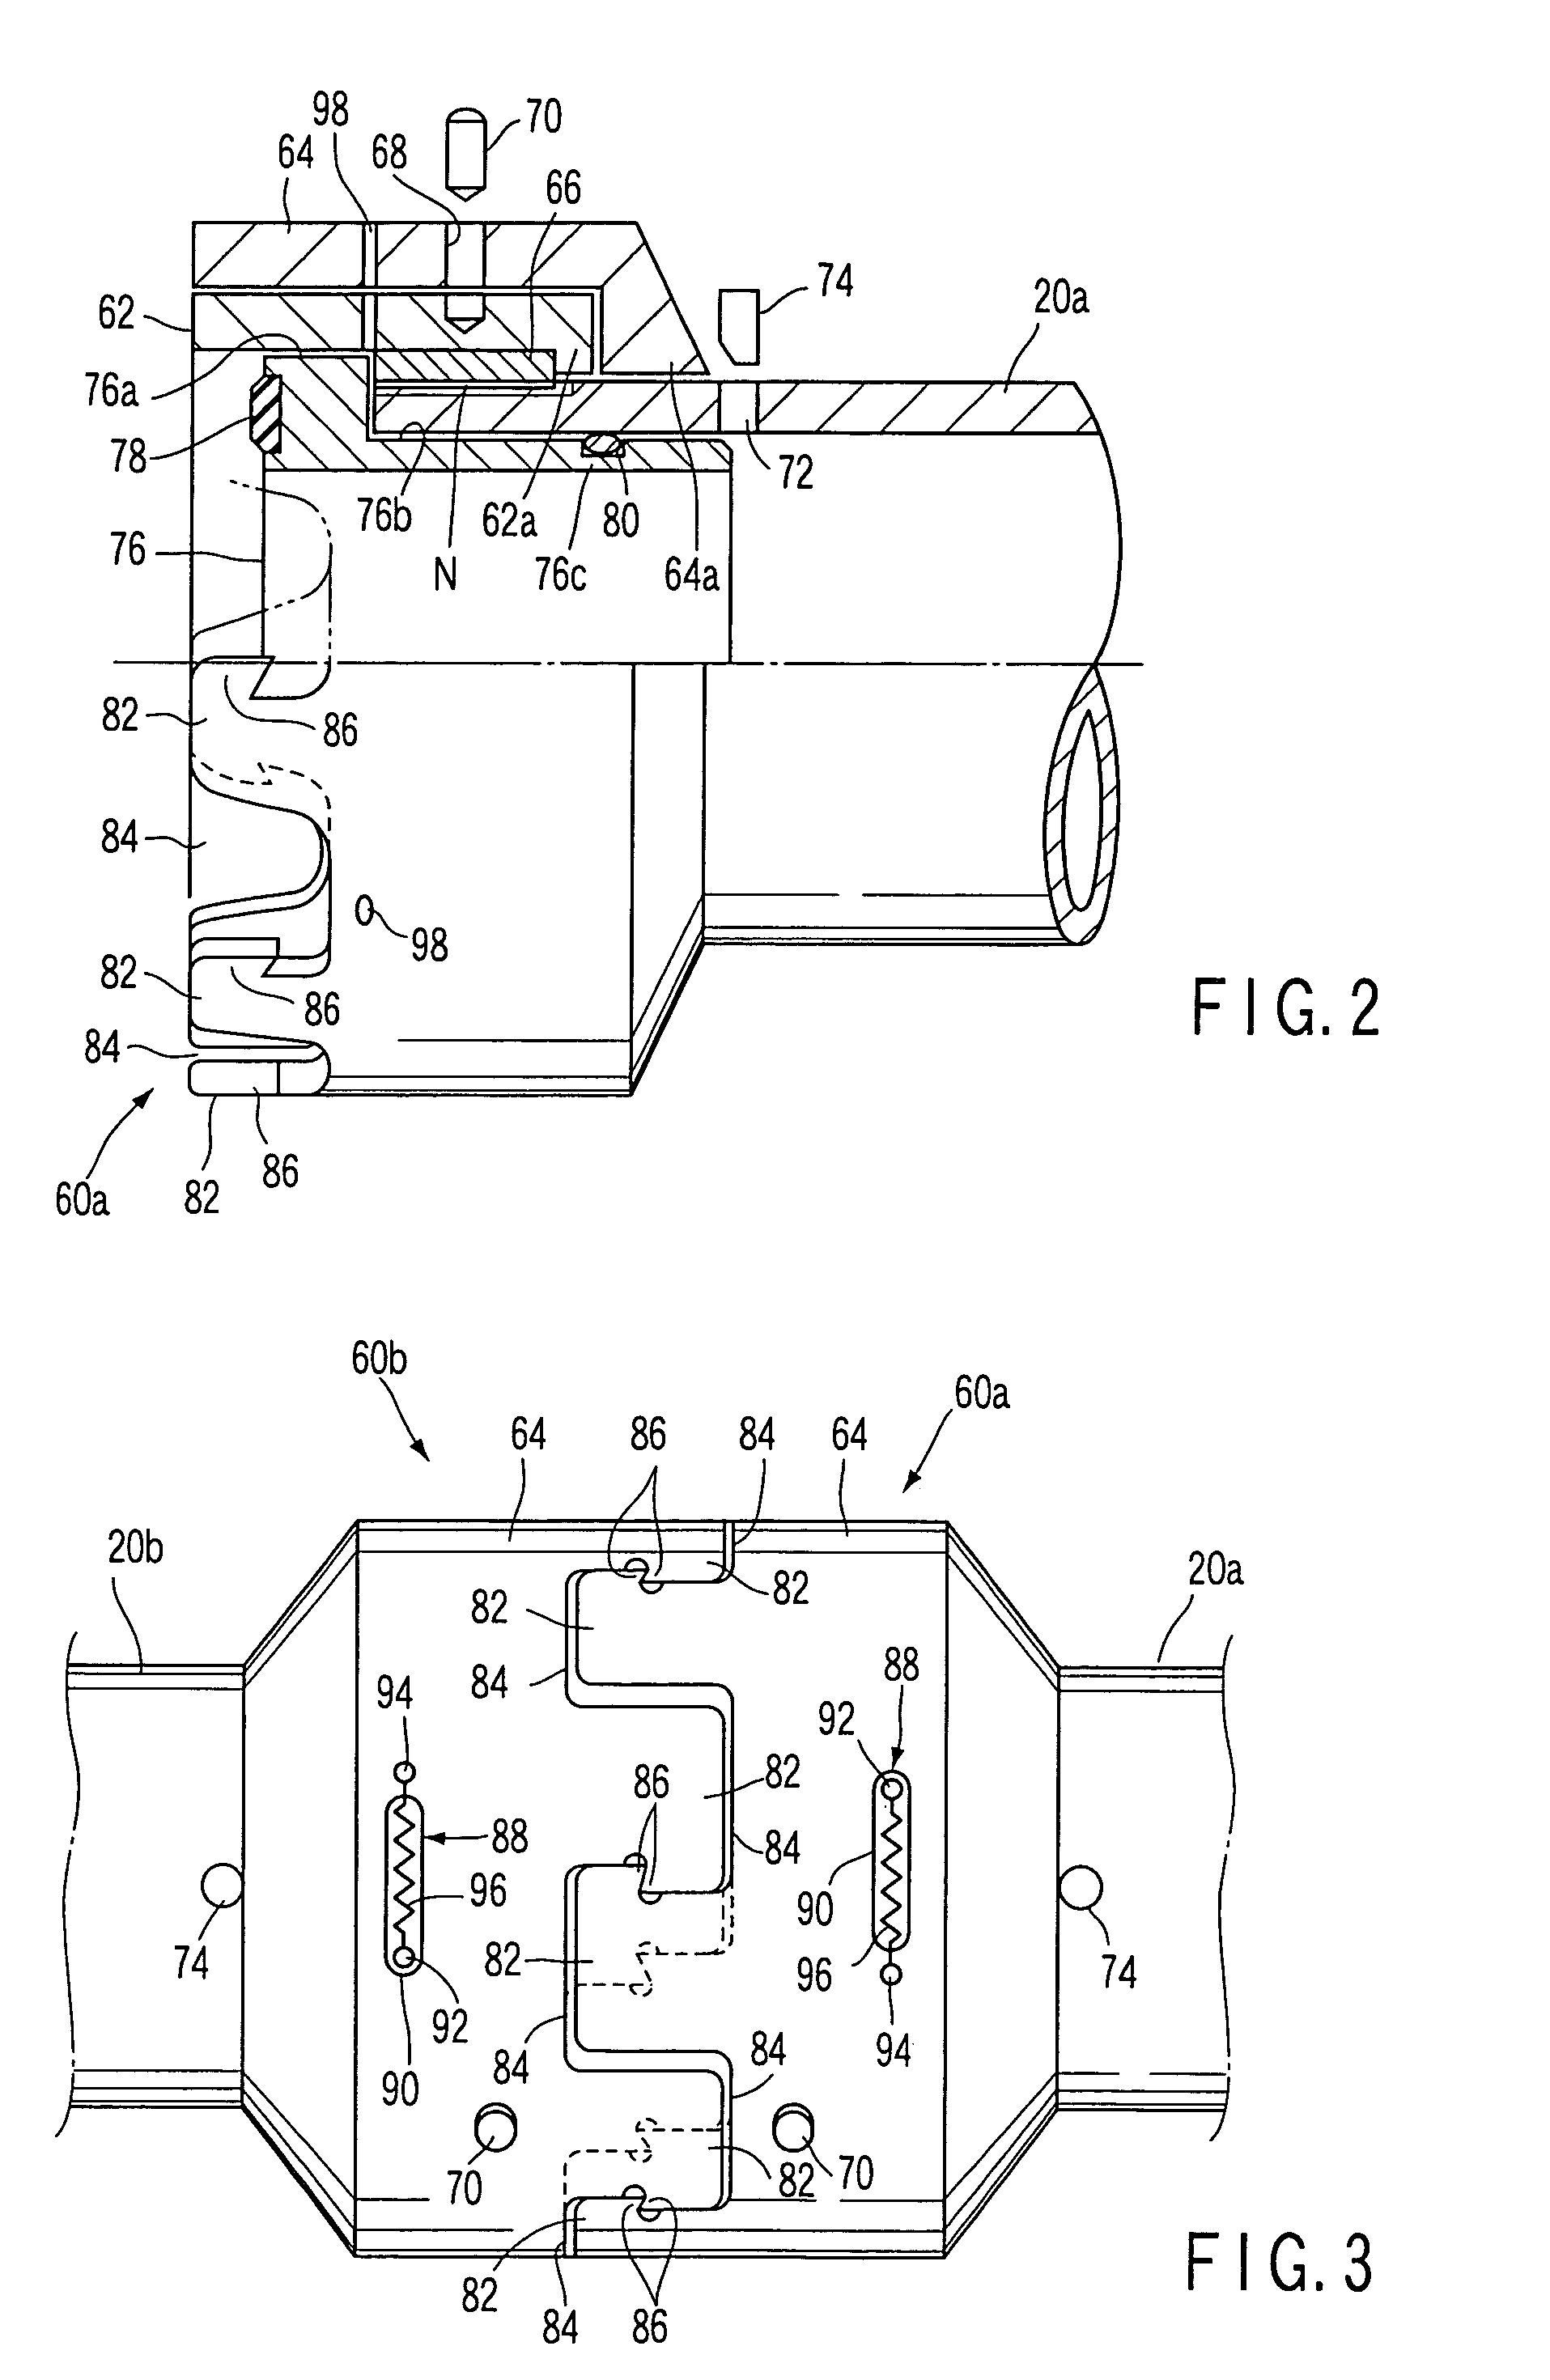 Coupling apparatus for structural members